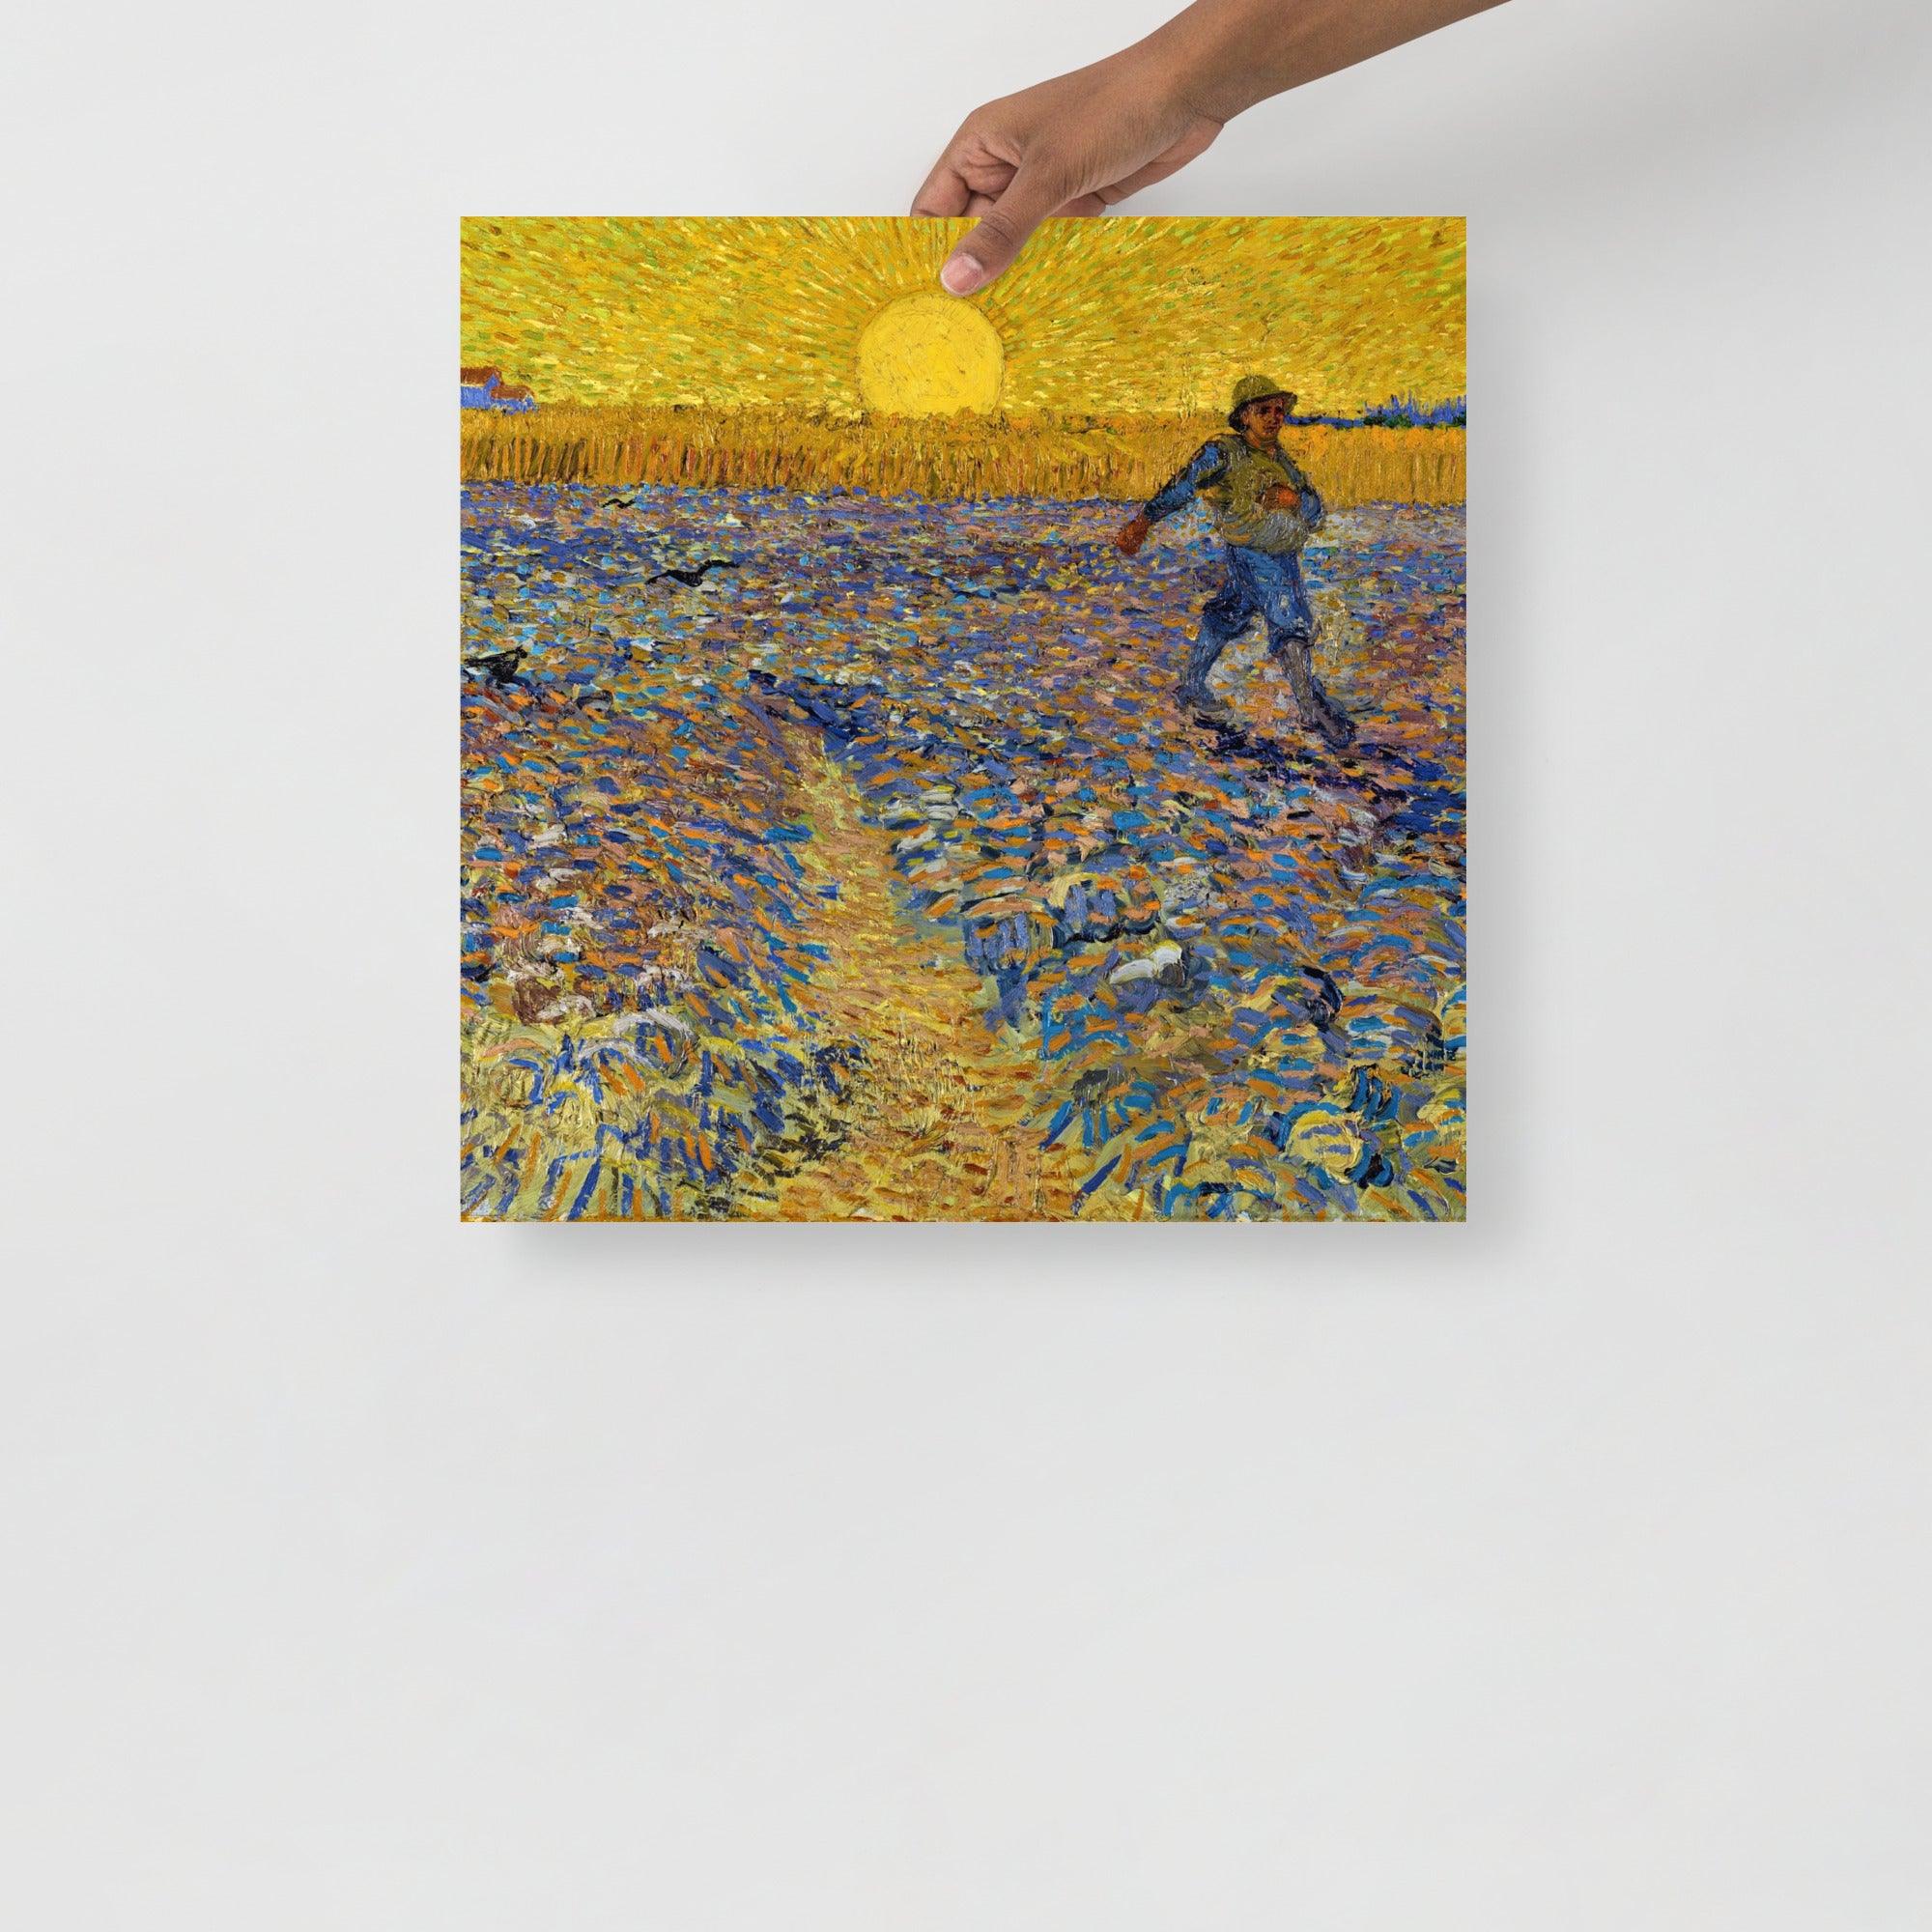 The Sower by Vincent Van Gogh poster on a plain backdrop in size18x18”.